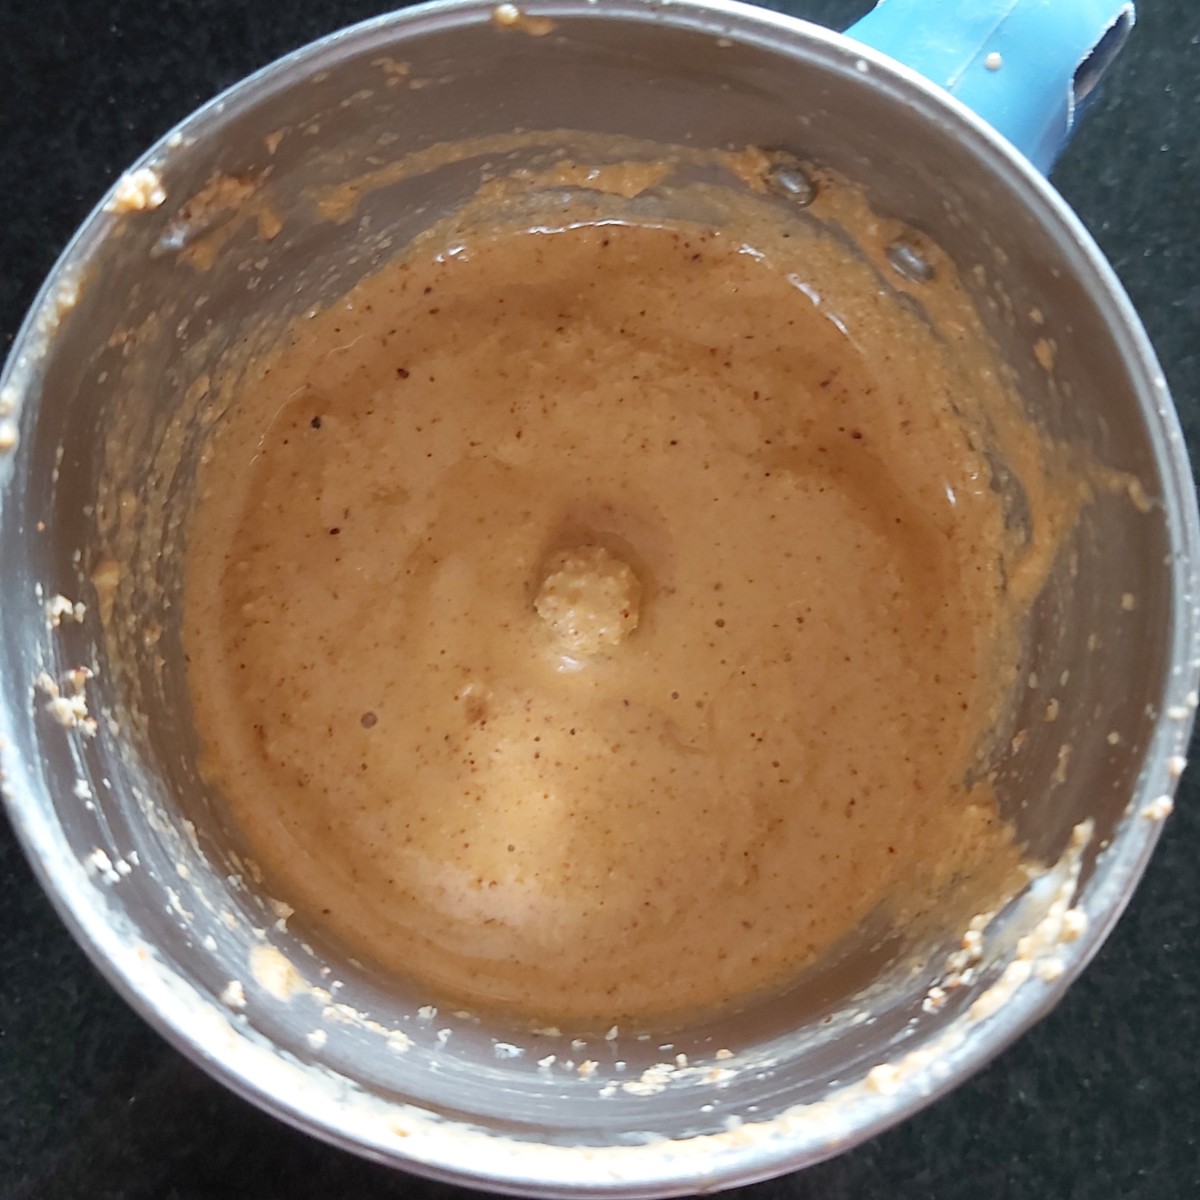 Add 3-4 tablespoons of water (or as required to grind coconut). Grind to a smooth paste.